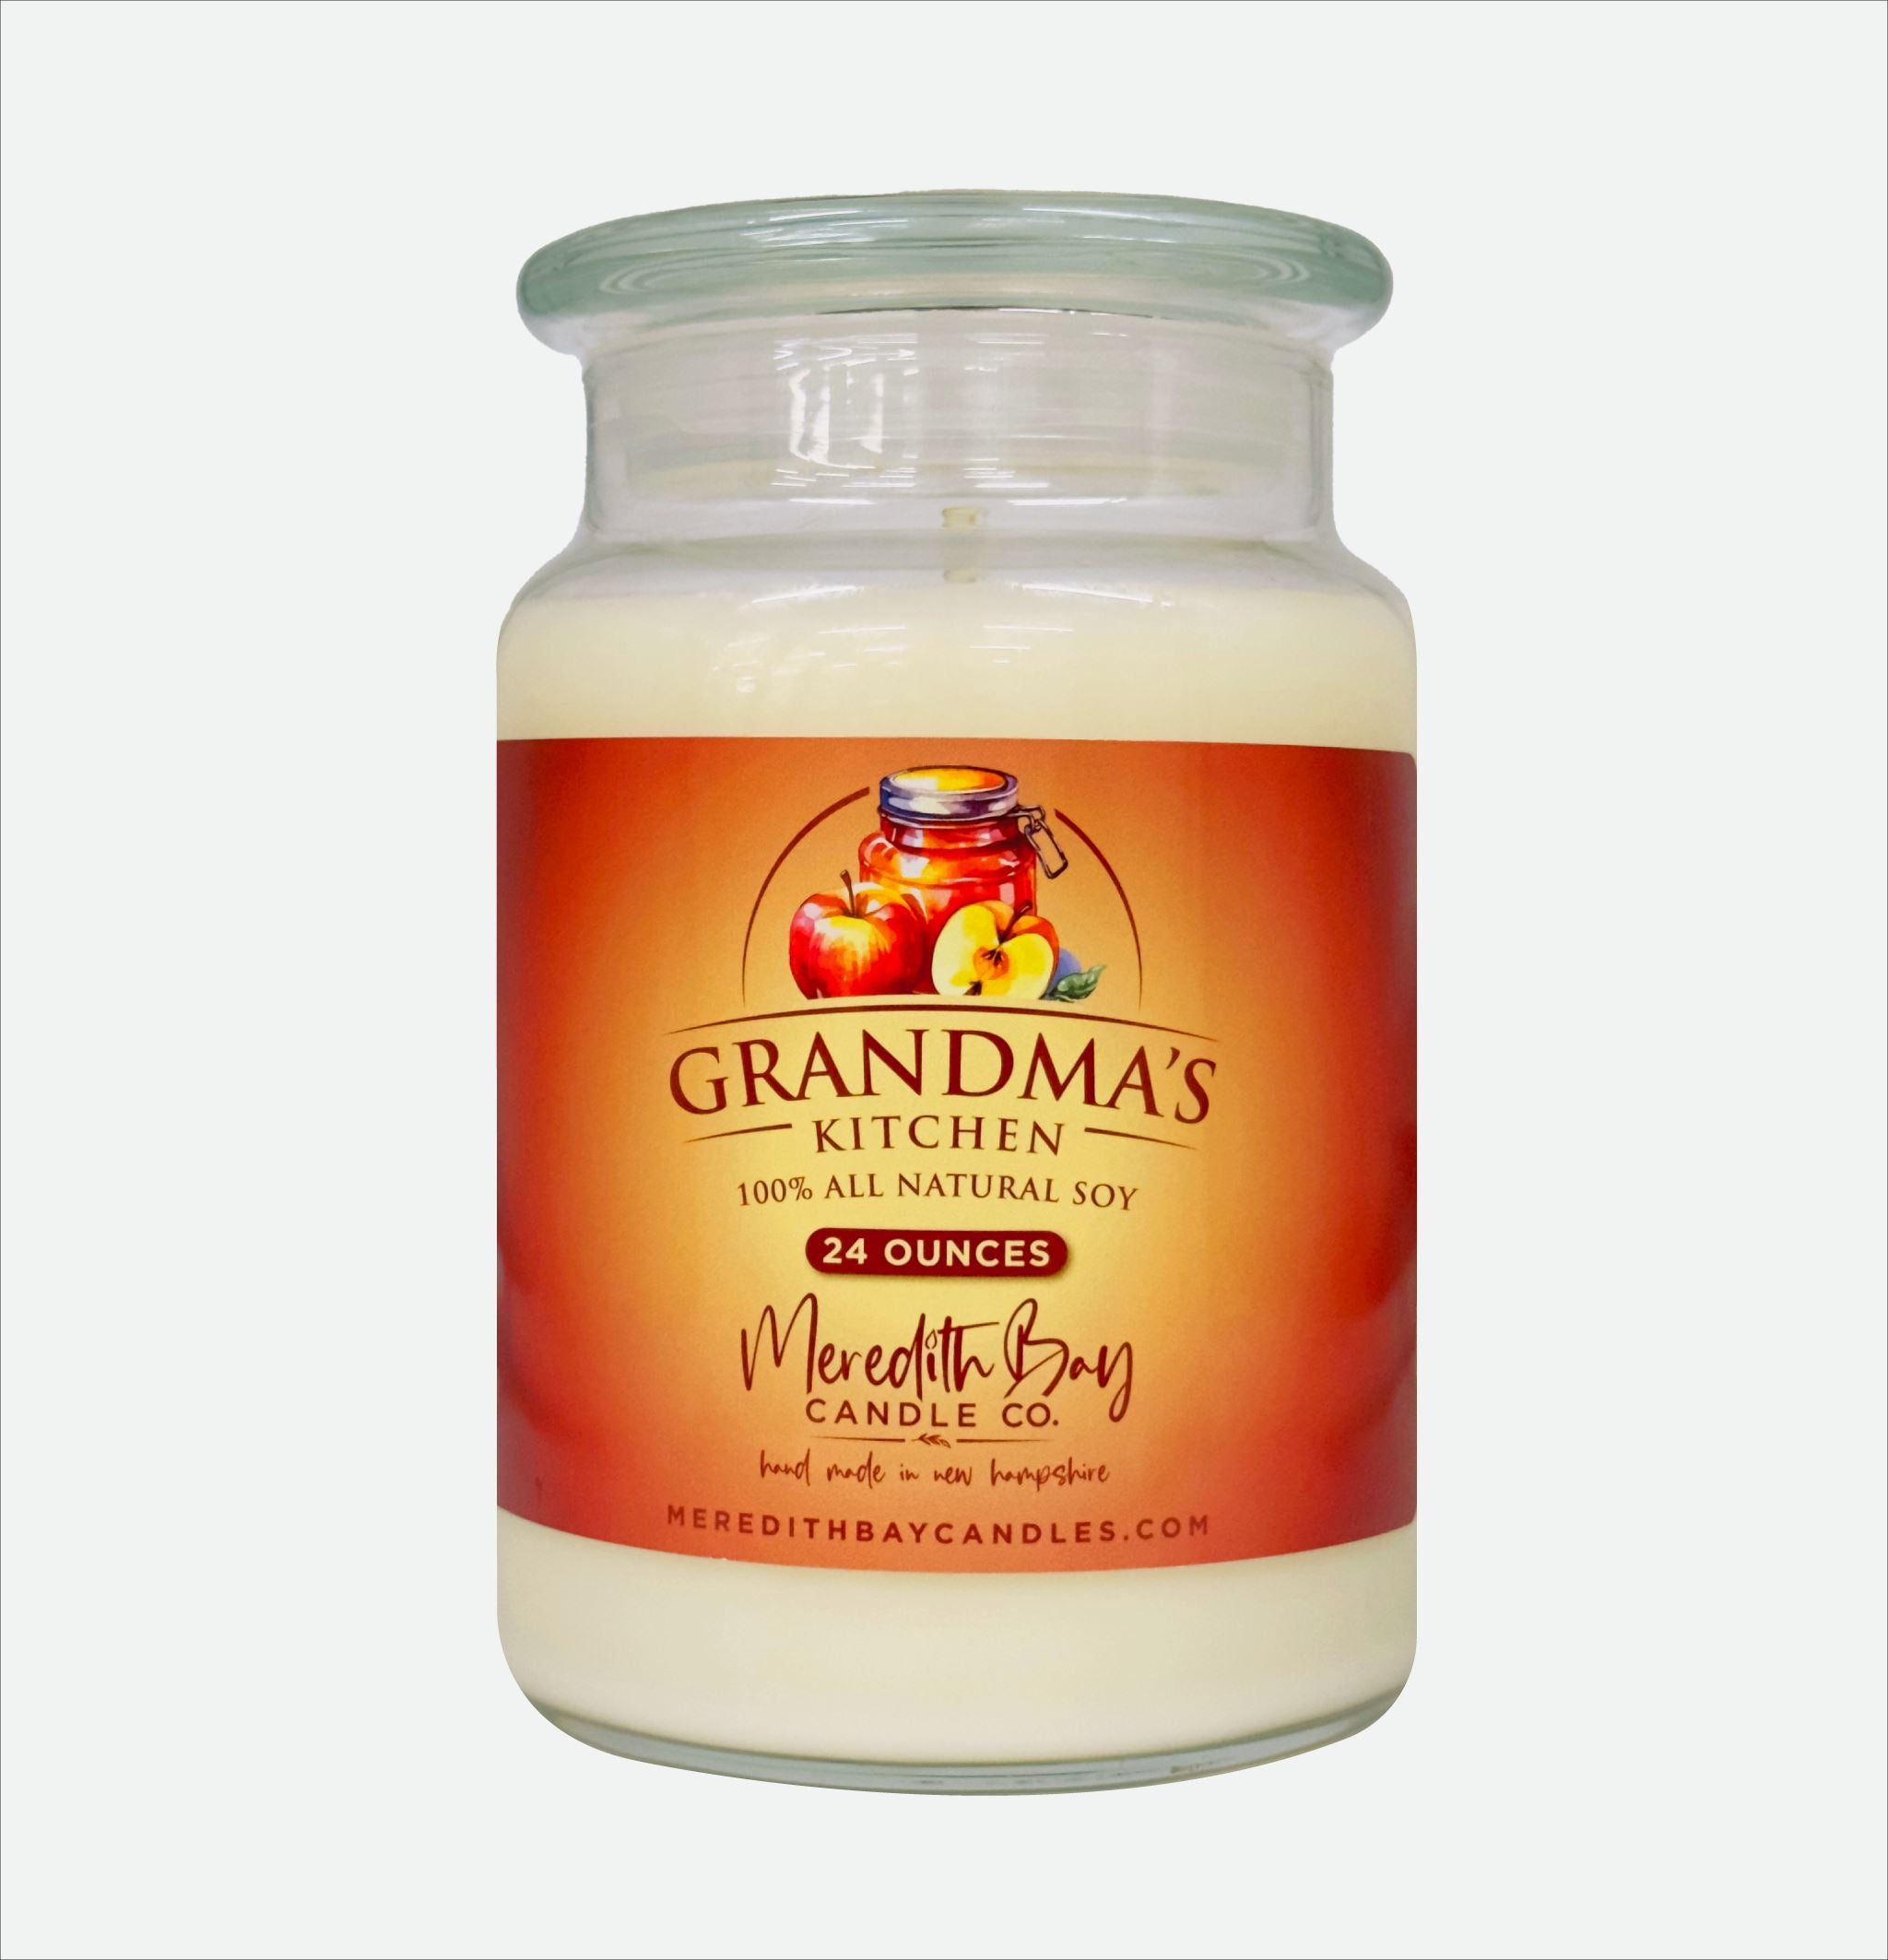 Grandma's Kitchen Soy Candle Meredith Bay Candle Co 24 Oz 